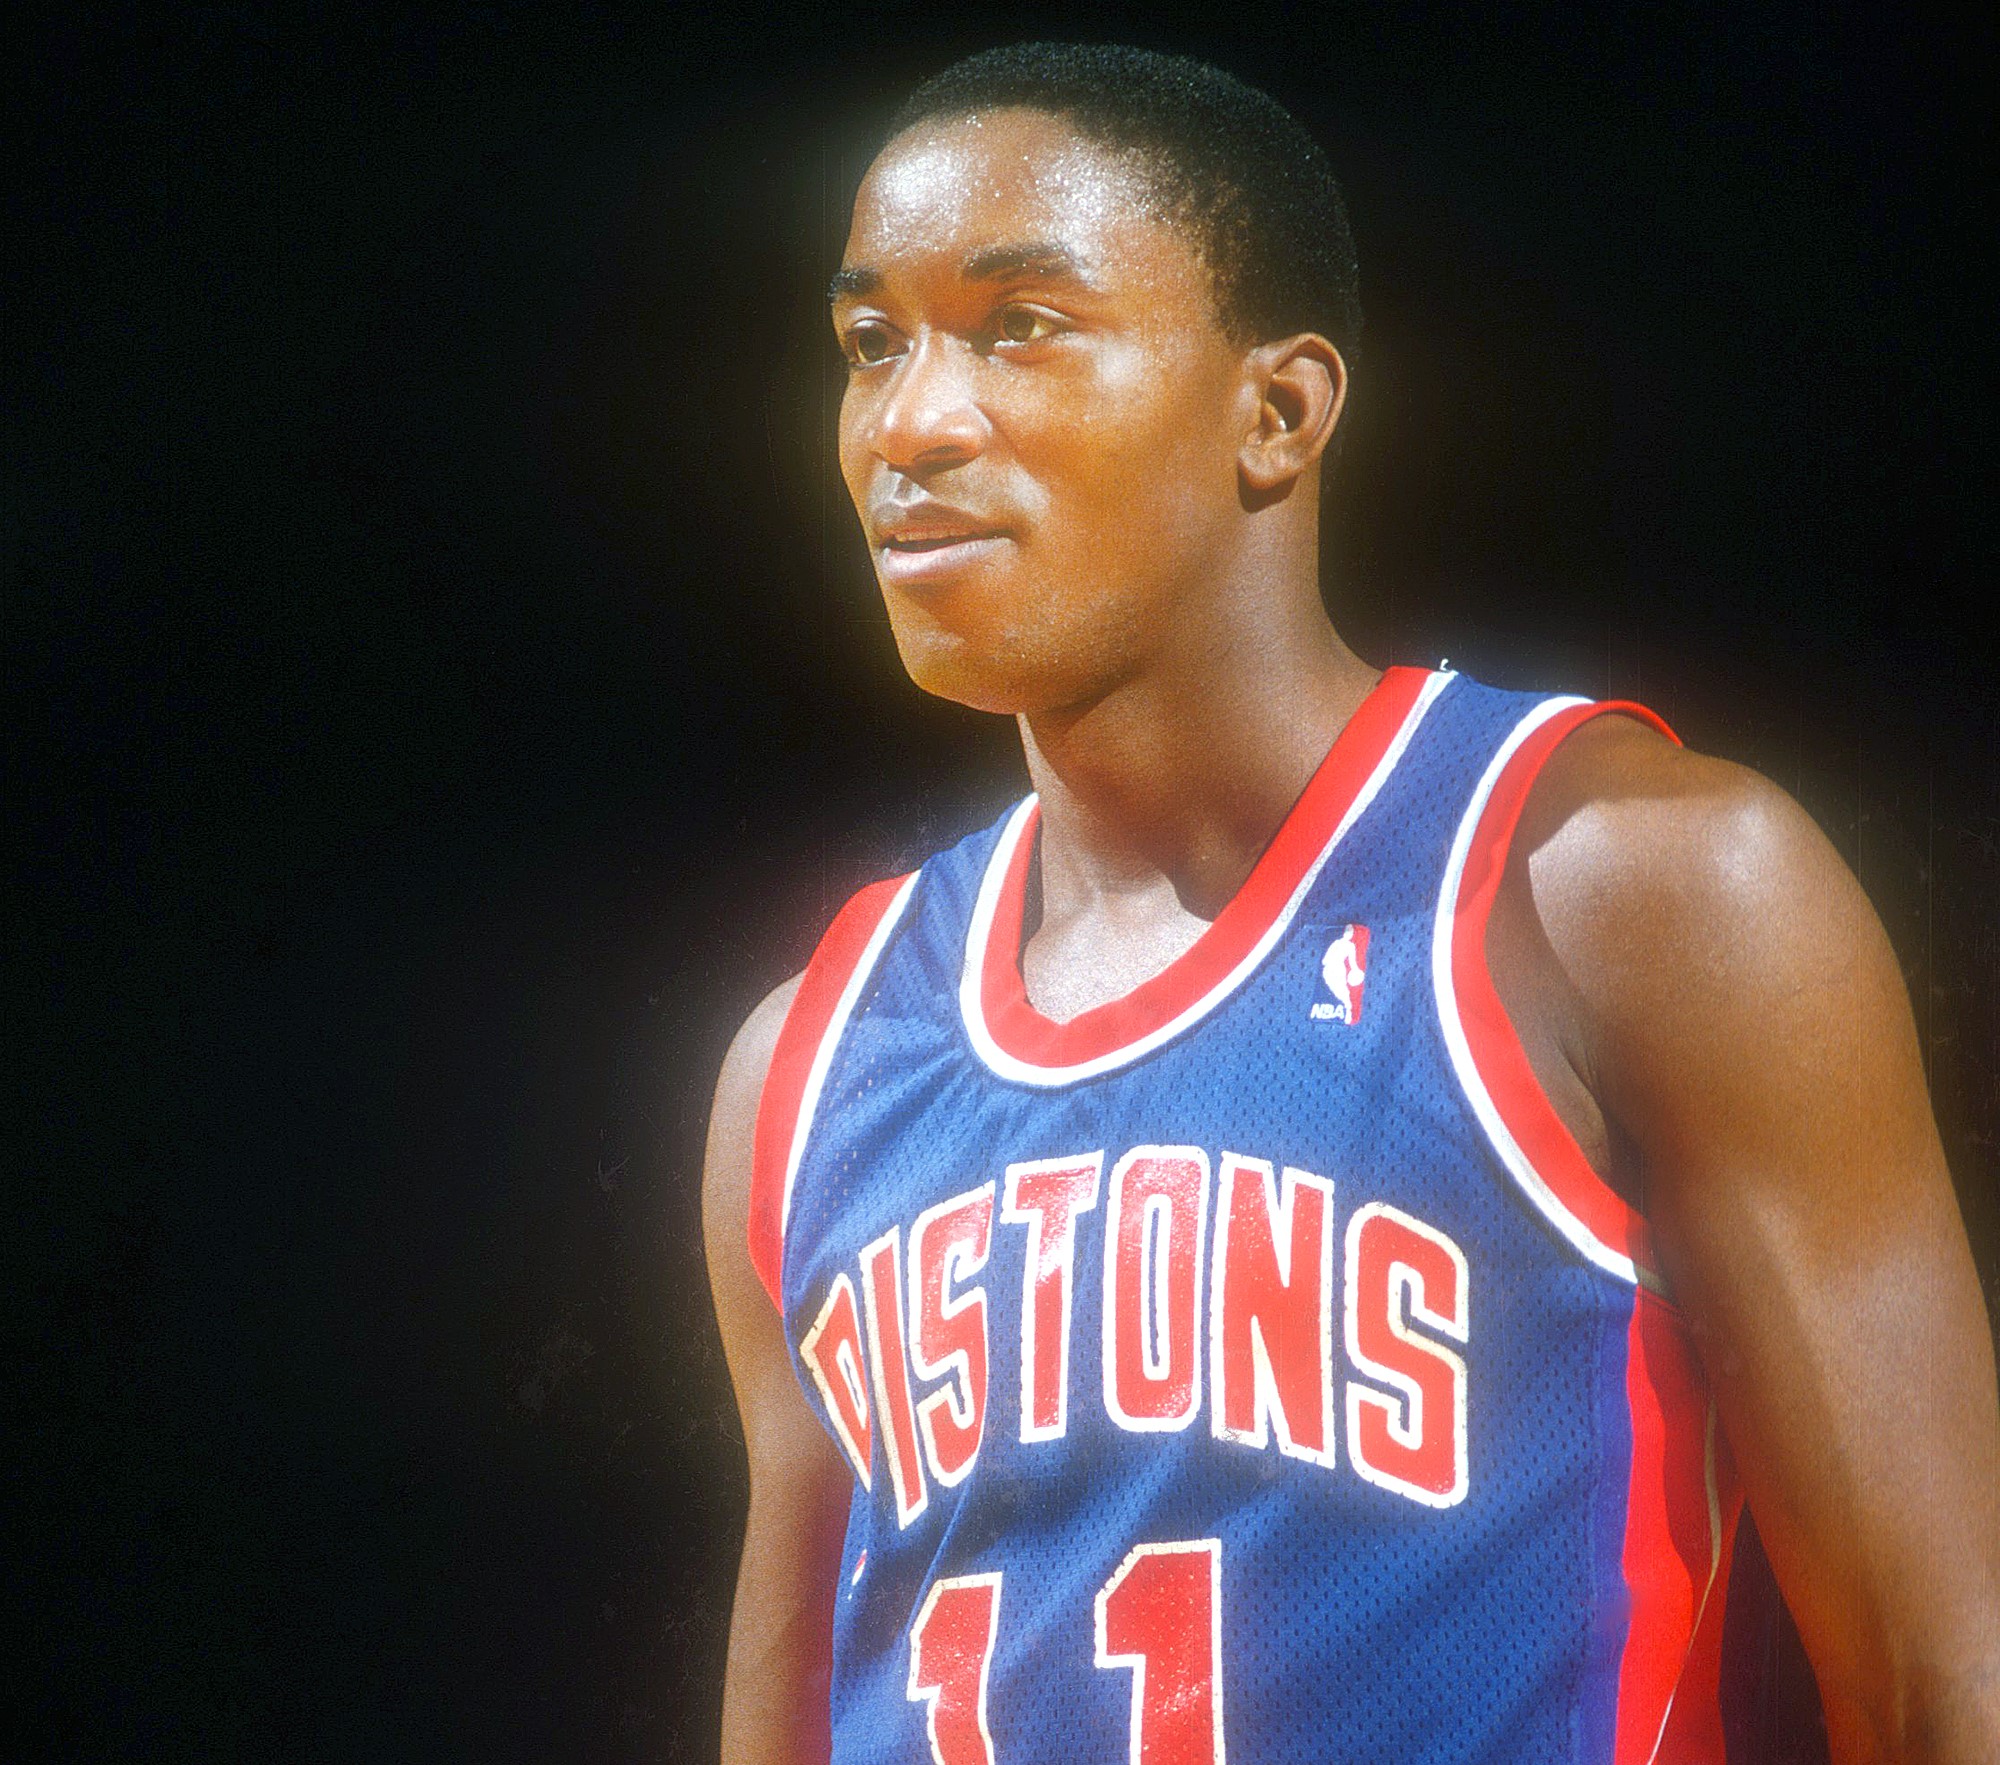 Isiah Thomas of the Detroit Pistons looks on during a NBA game against the Washington Bullets.